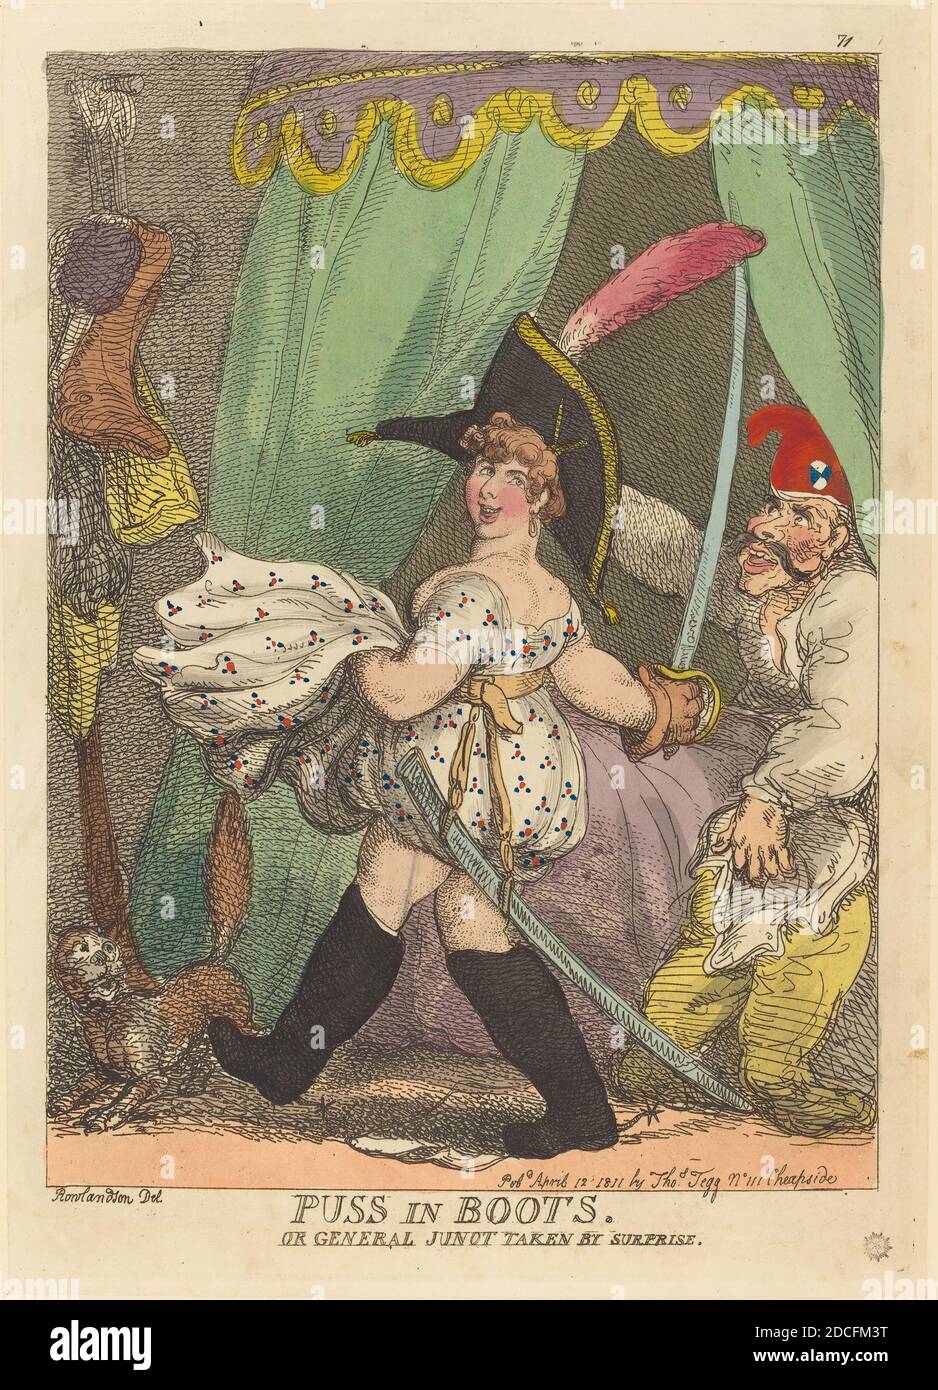 Thomas Rowlandson, (artist), British, 1756 - 1827, Puss in Boots, or General Junot taken by Surprise, published 1811, hand-colored etching Stock Photo